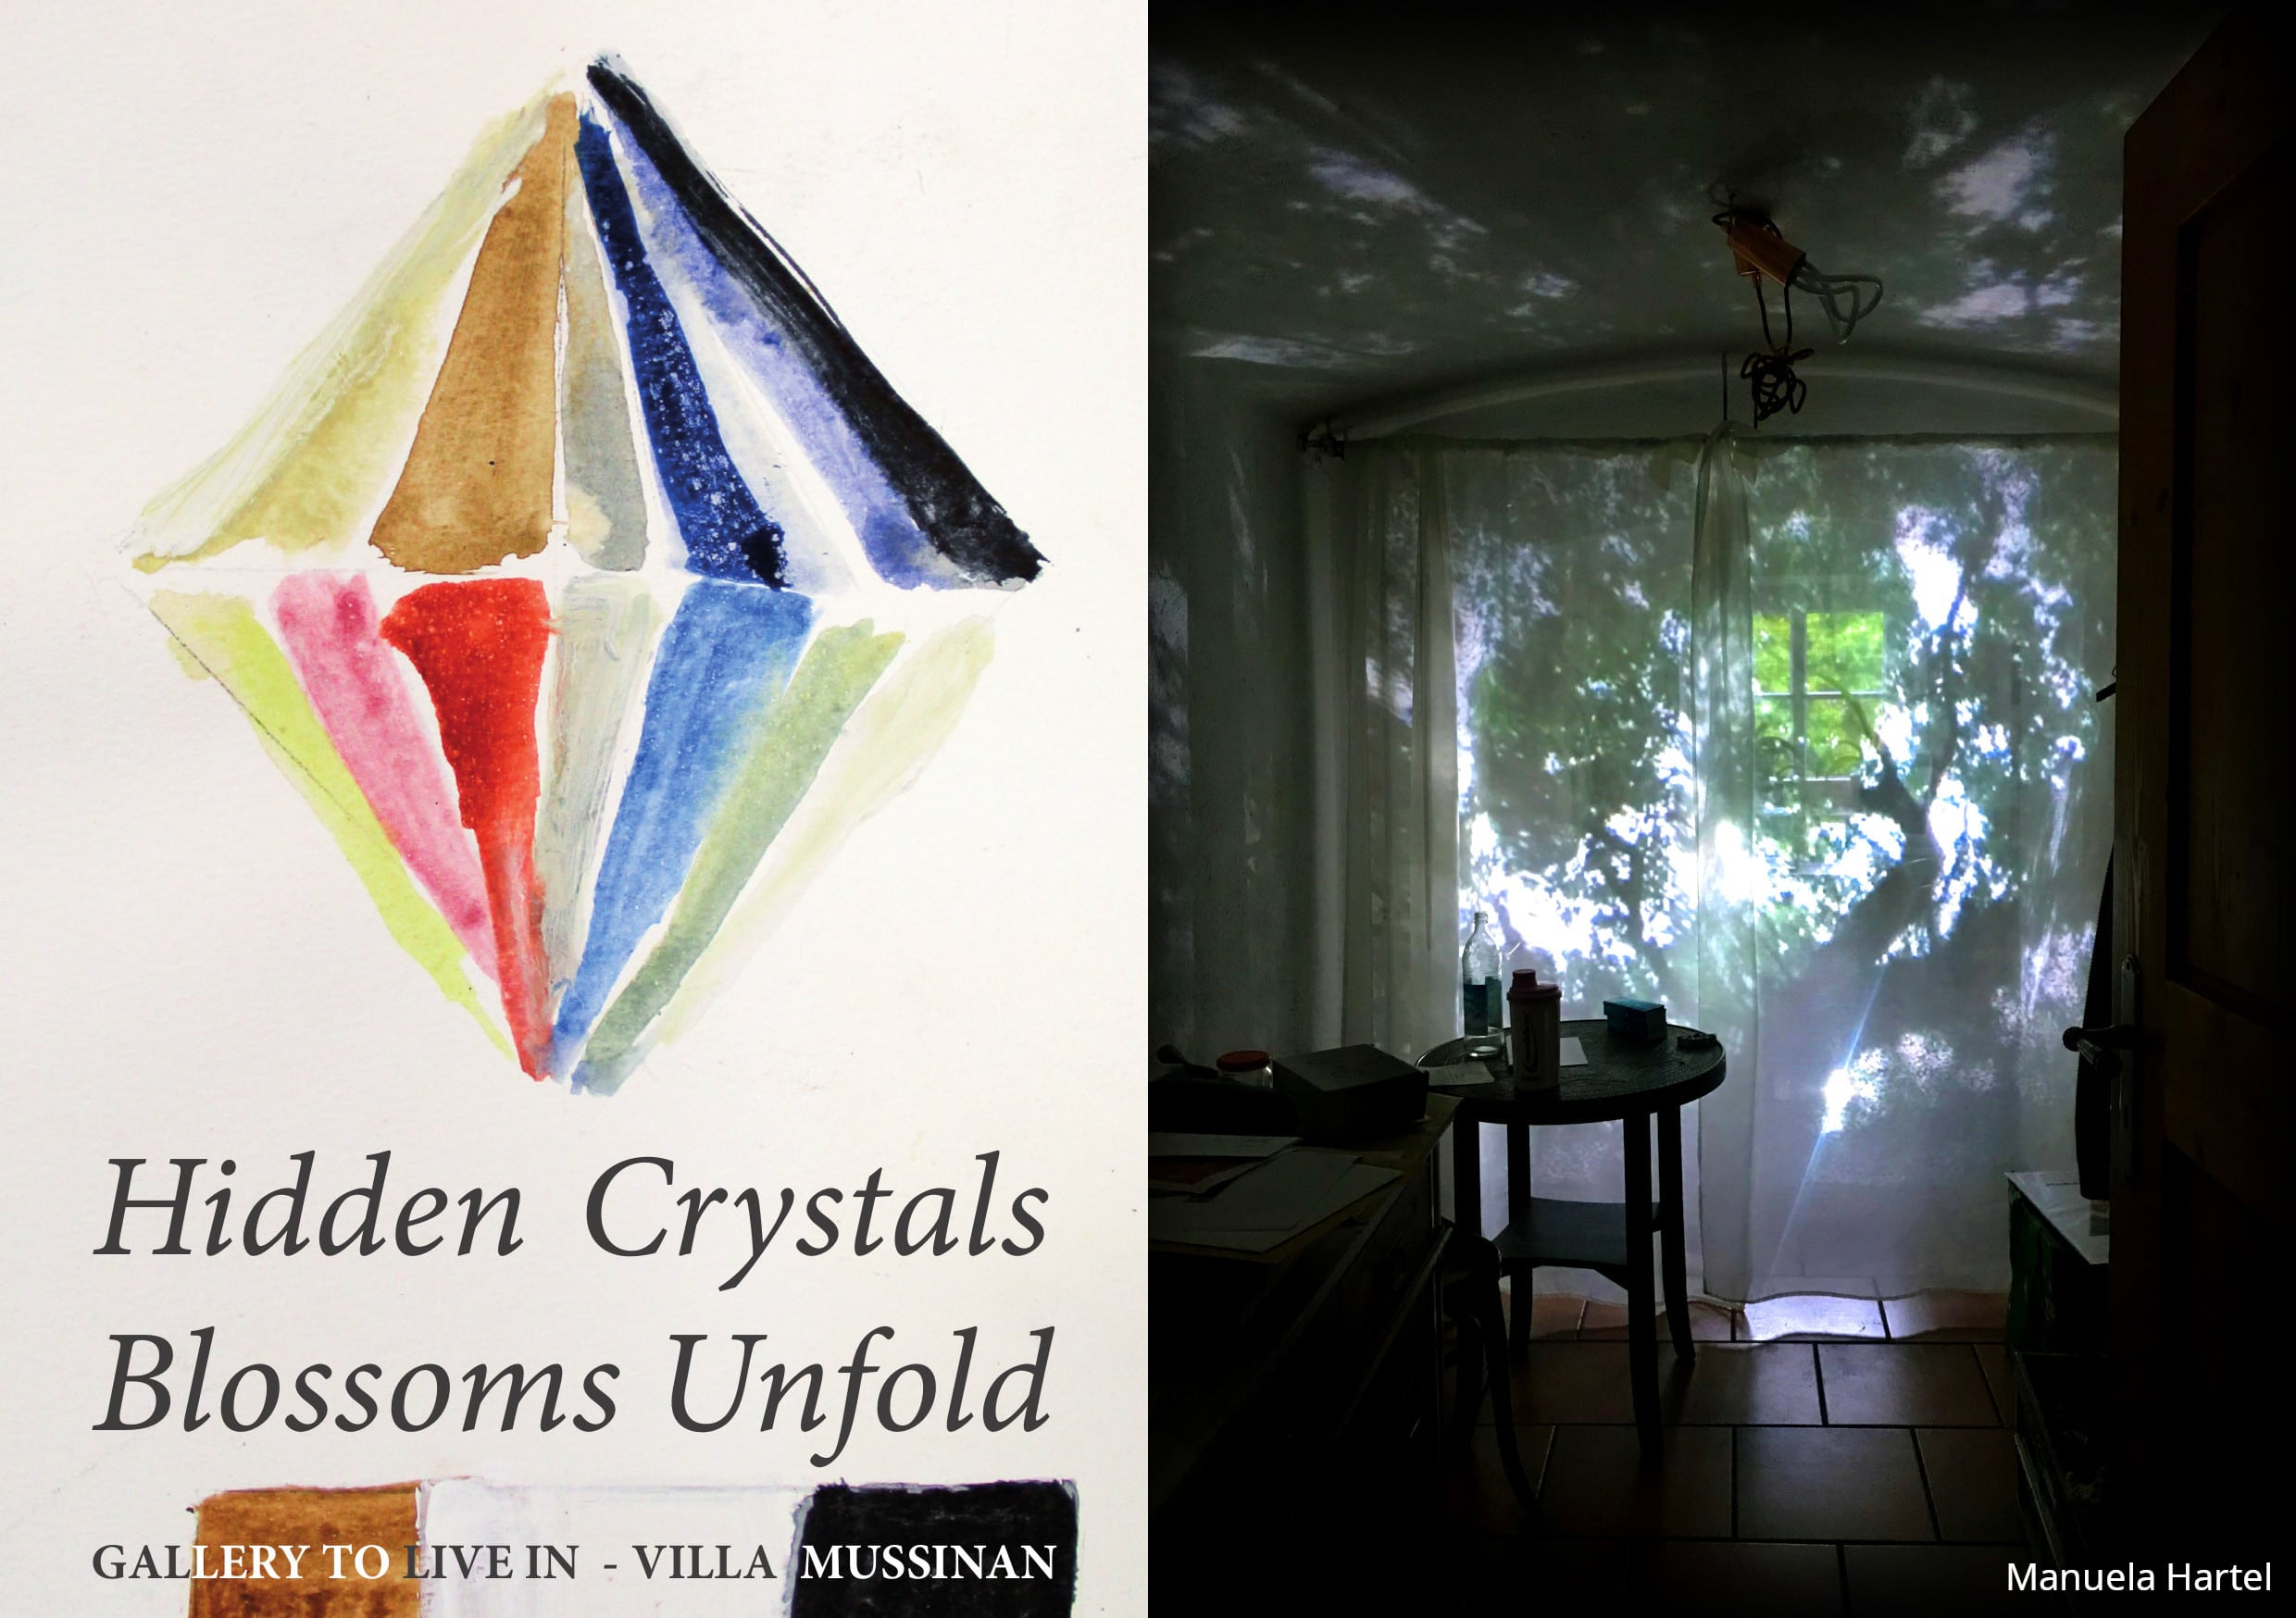 Hidden Crystals – Blossoms Unfold, Gallery to live in – Villa Mussinan